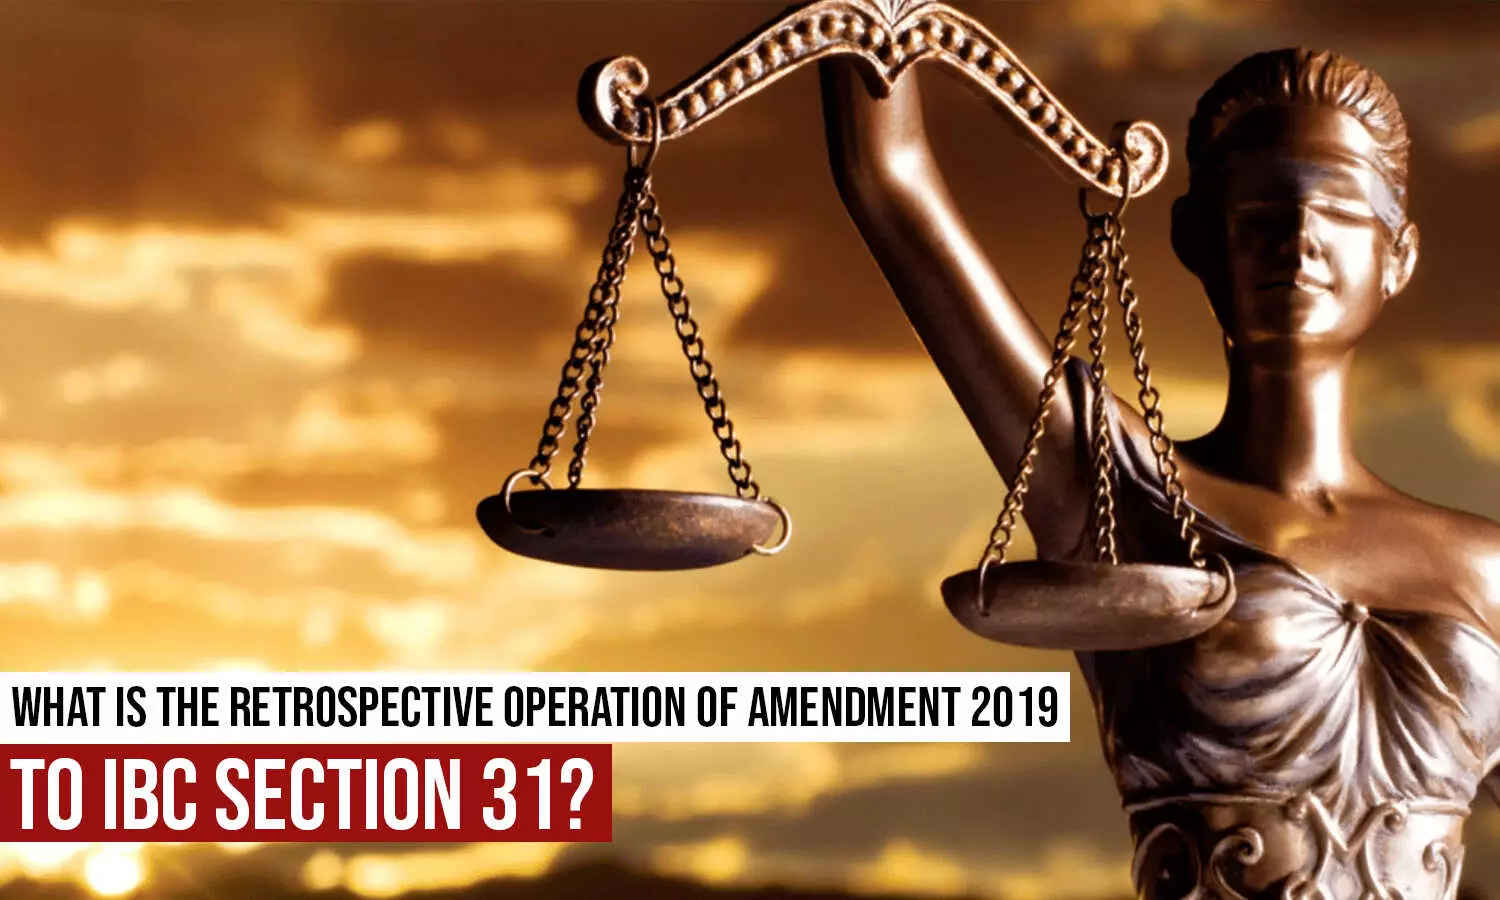 Retrospective Operation of Section 31 of the IBC after the 2019 Amendment